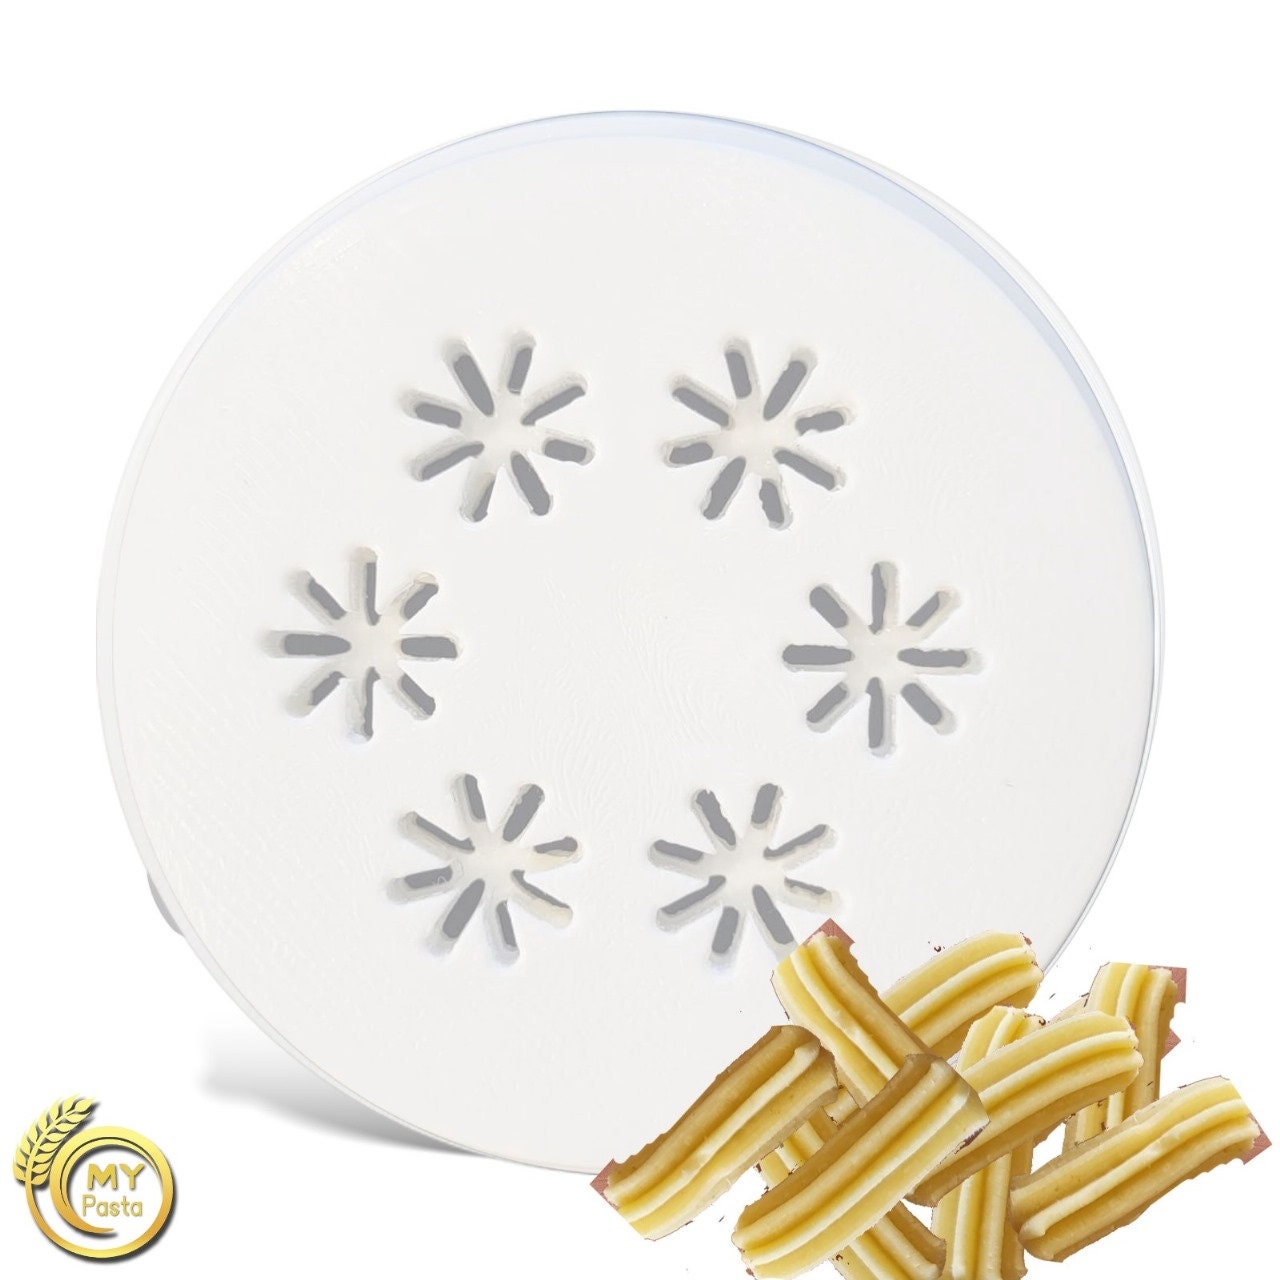 MY PASTA Baking Pastina Pasta Mold for Pasta Maker Suitable for Philips  Pasta Maker Avance Pasta Disk Matrices for Homemade Pasta 